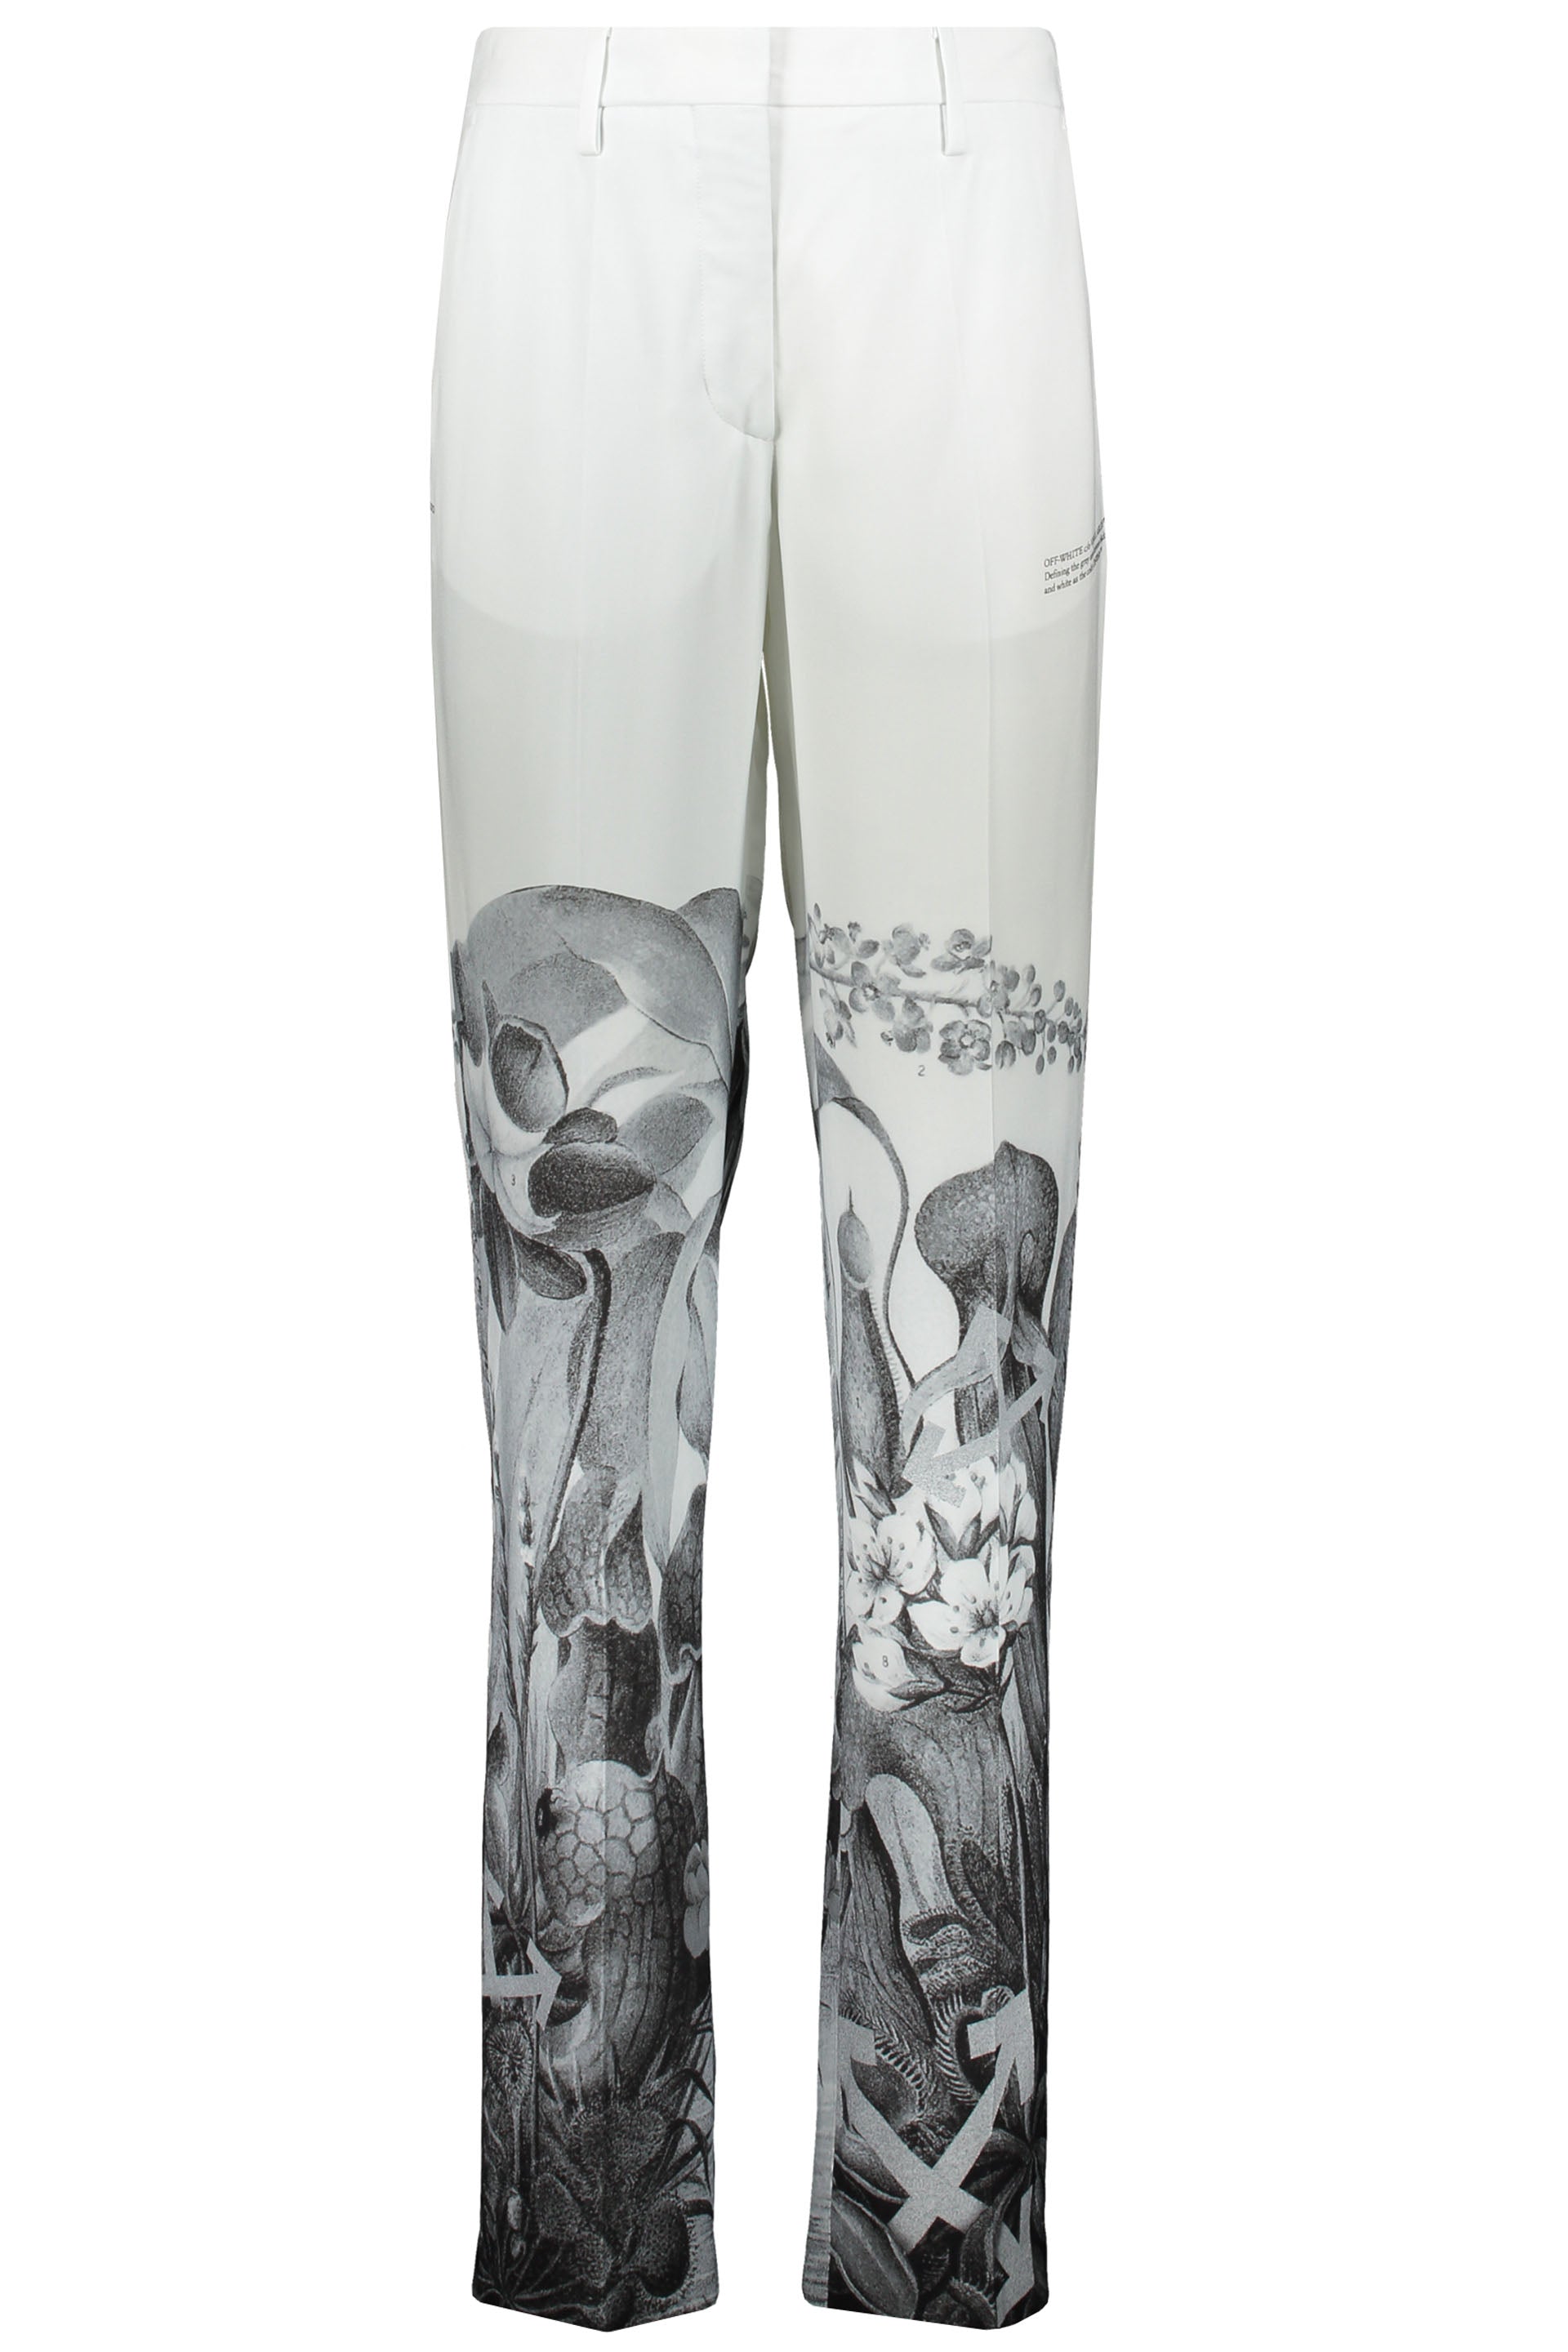 Off-White-OUTLET-SALE-Printed-trousers-Hosen-38-ARCHIVE-COLLECTION.jpg